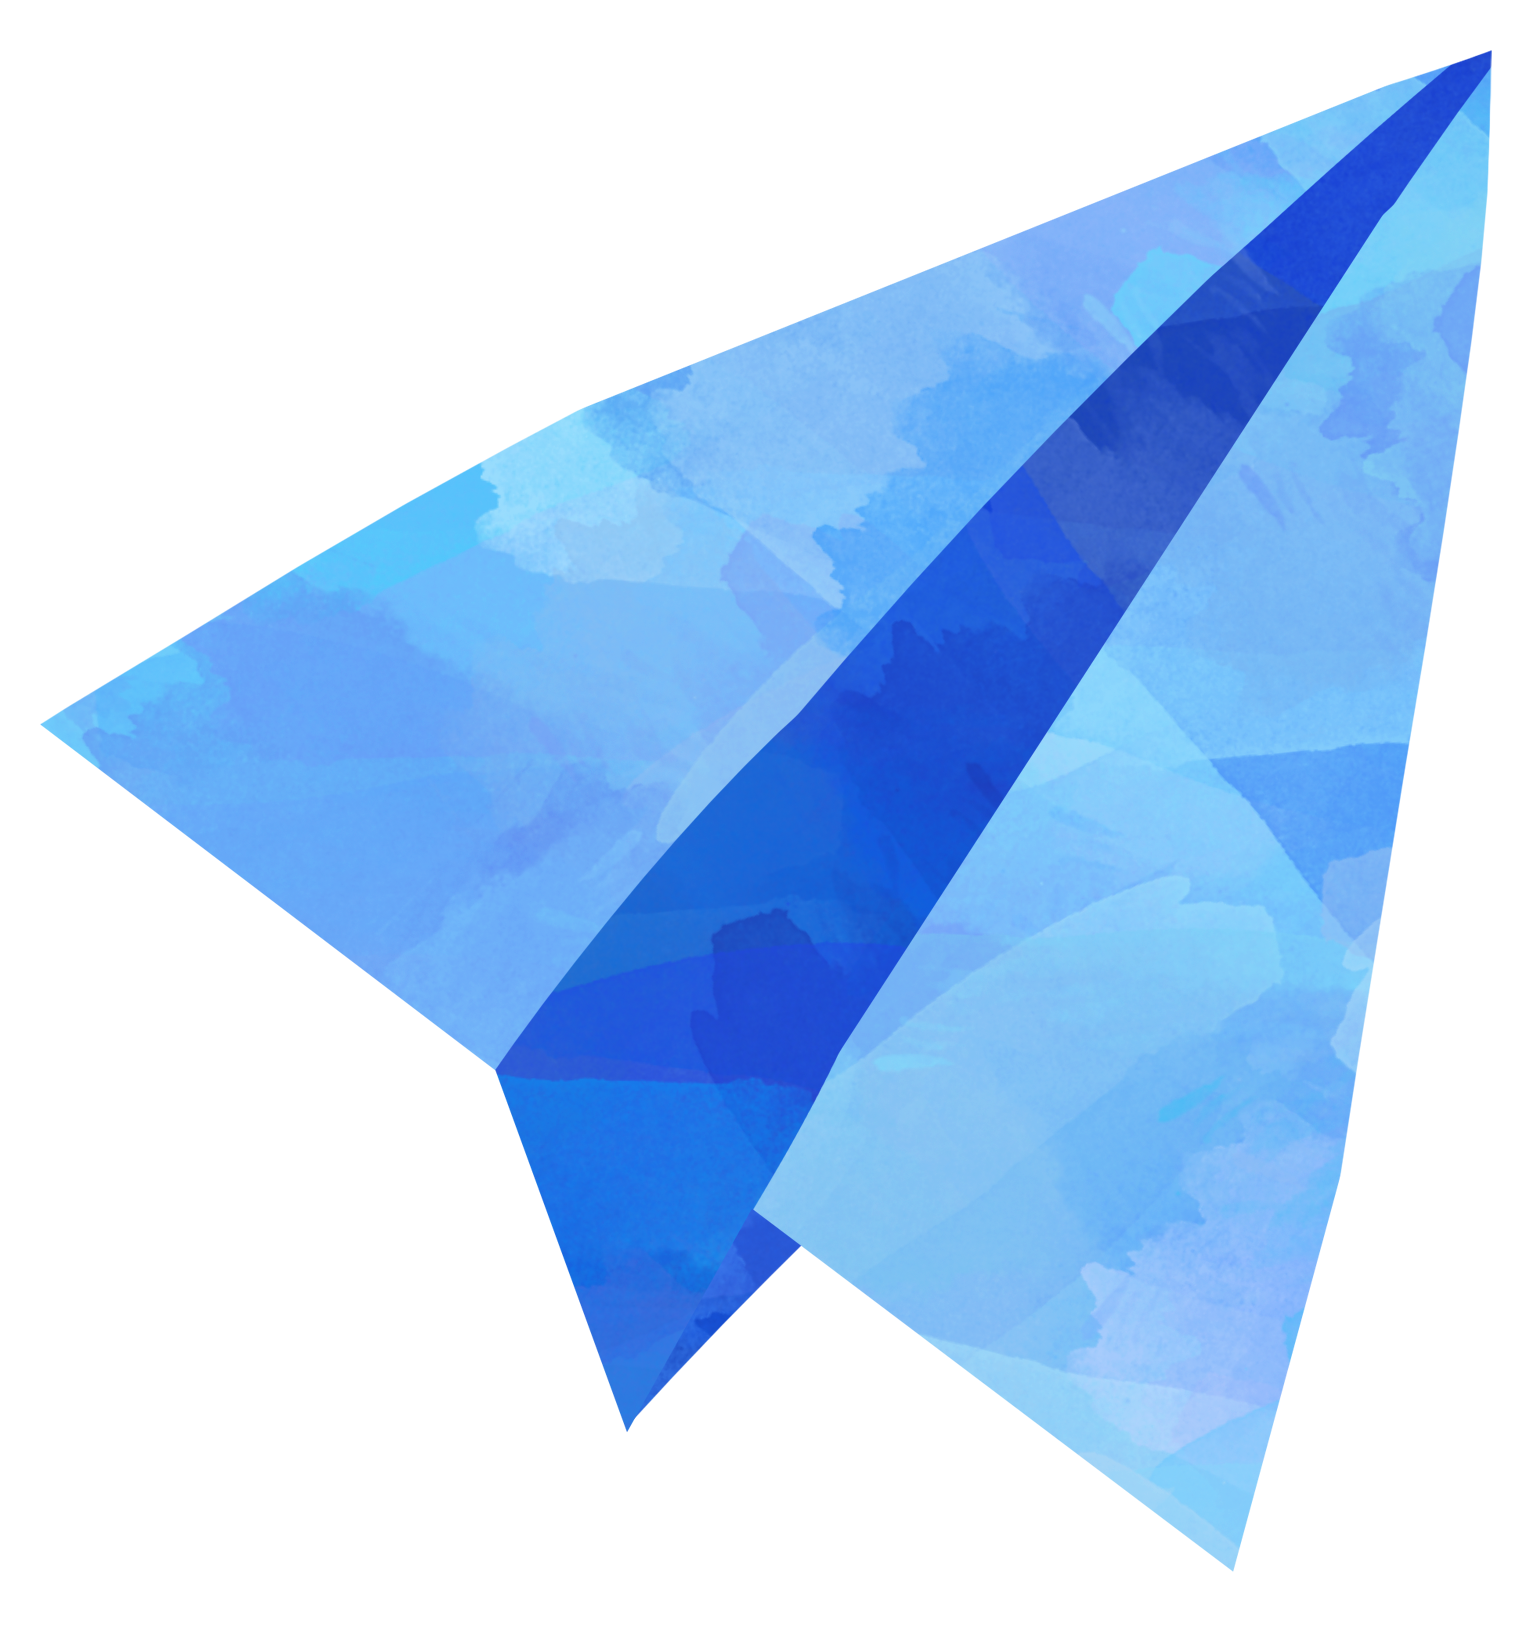 Paper_Airplane_09